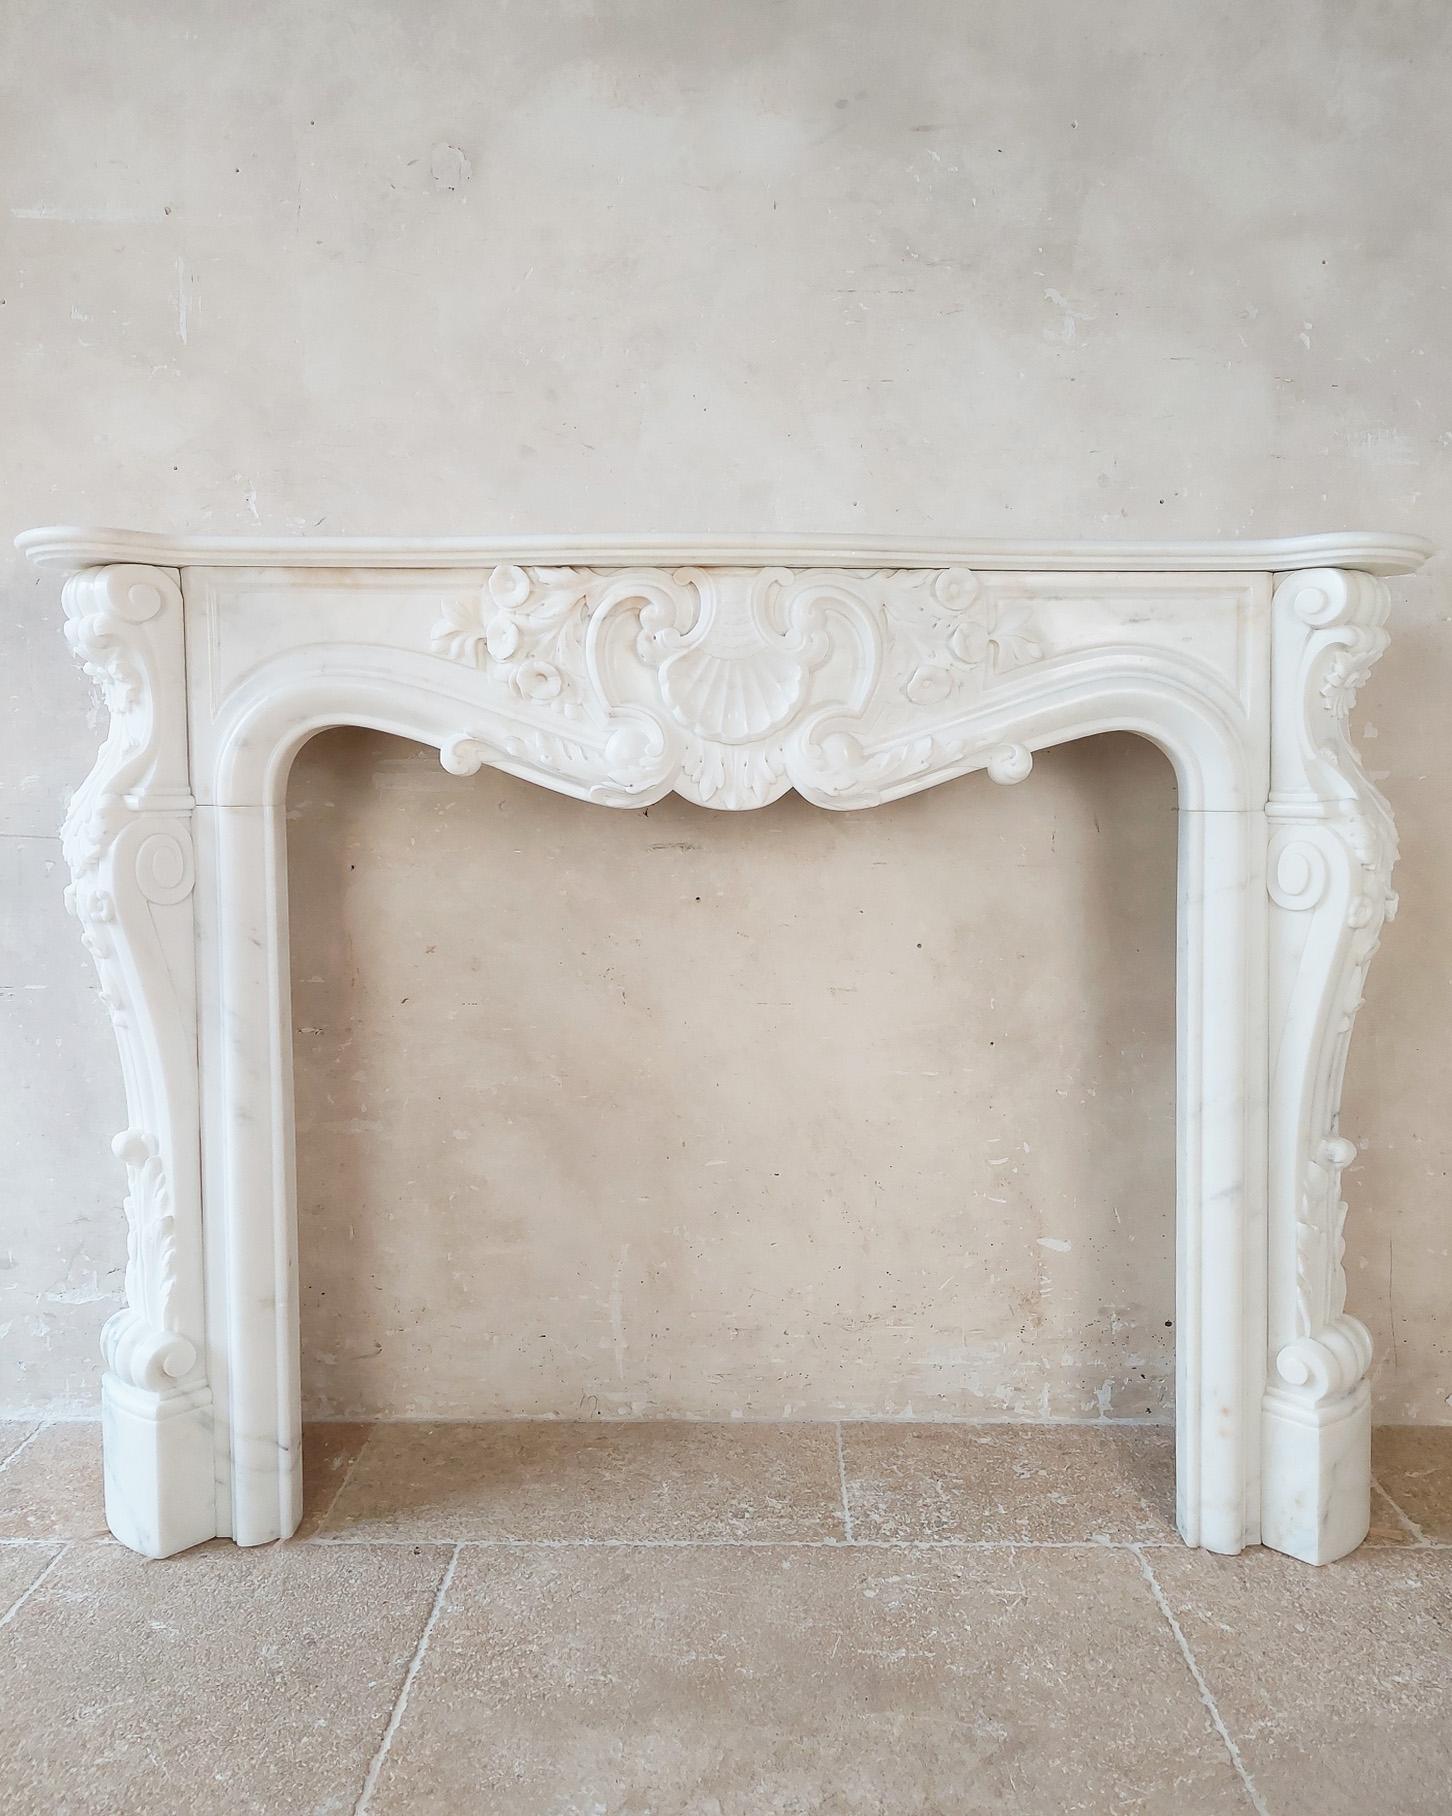 Rich 19th century Trois coquilles mantelpiece made of very white statuary quality bianco carrara marble. The front and the entire styles of this fireplace have coquilles and flower decorations.

h 107 x w 145 x d 35 cm
opening: h 80 x w 94 cm